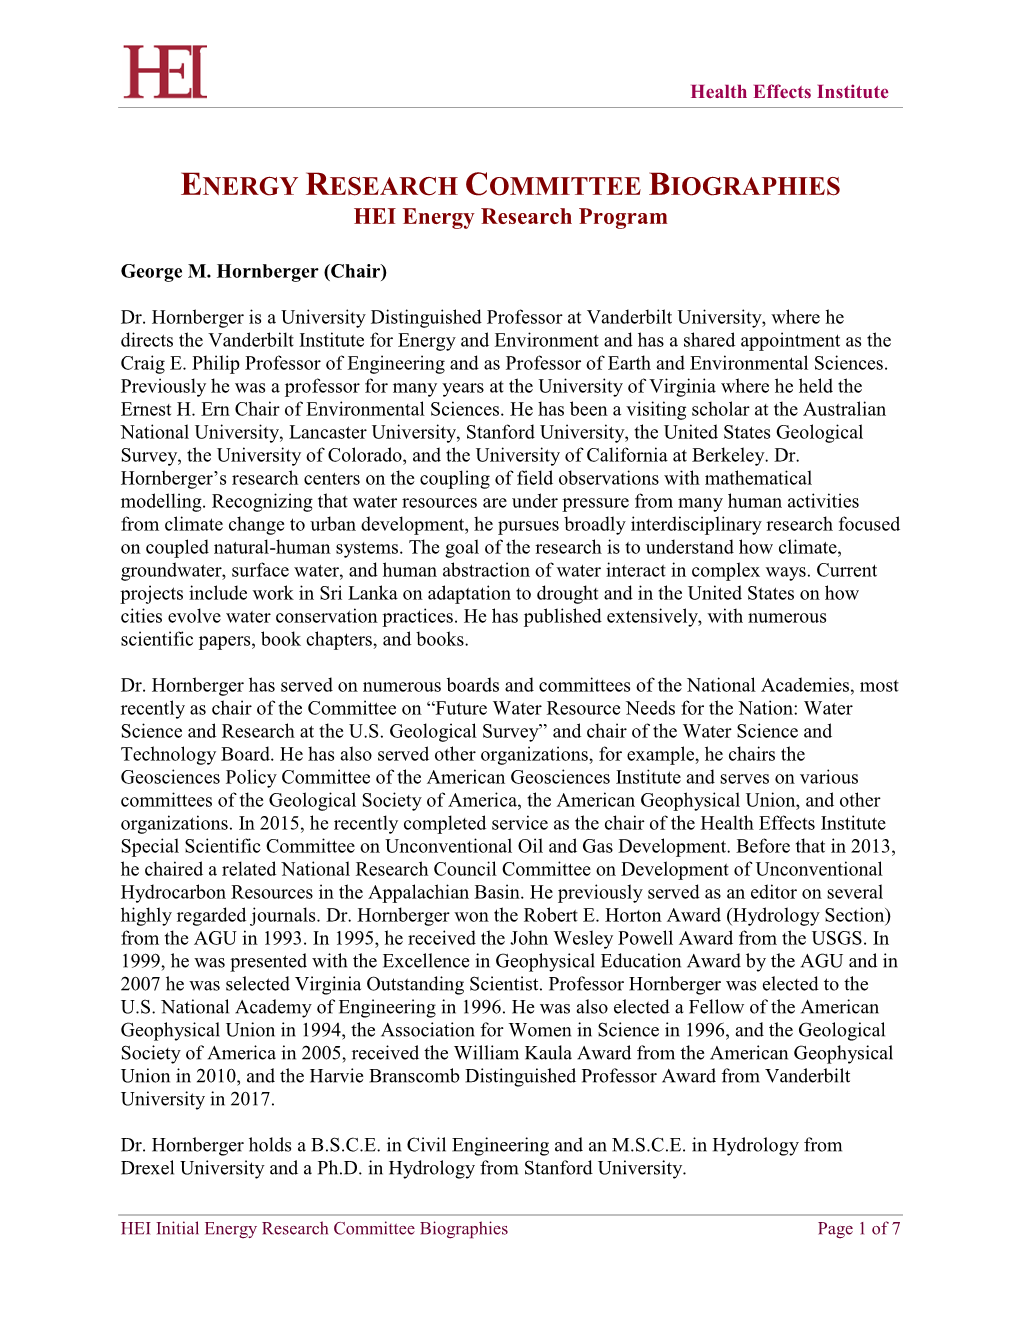 ENERGY RESEARCH COMMITTEE BIOGRAPHIES HEI Energy Research Program